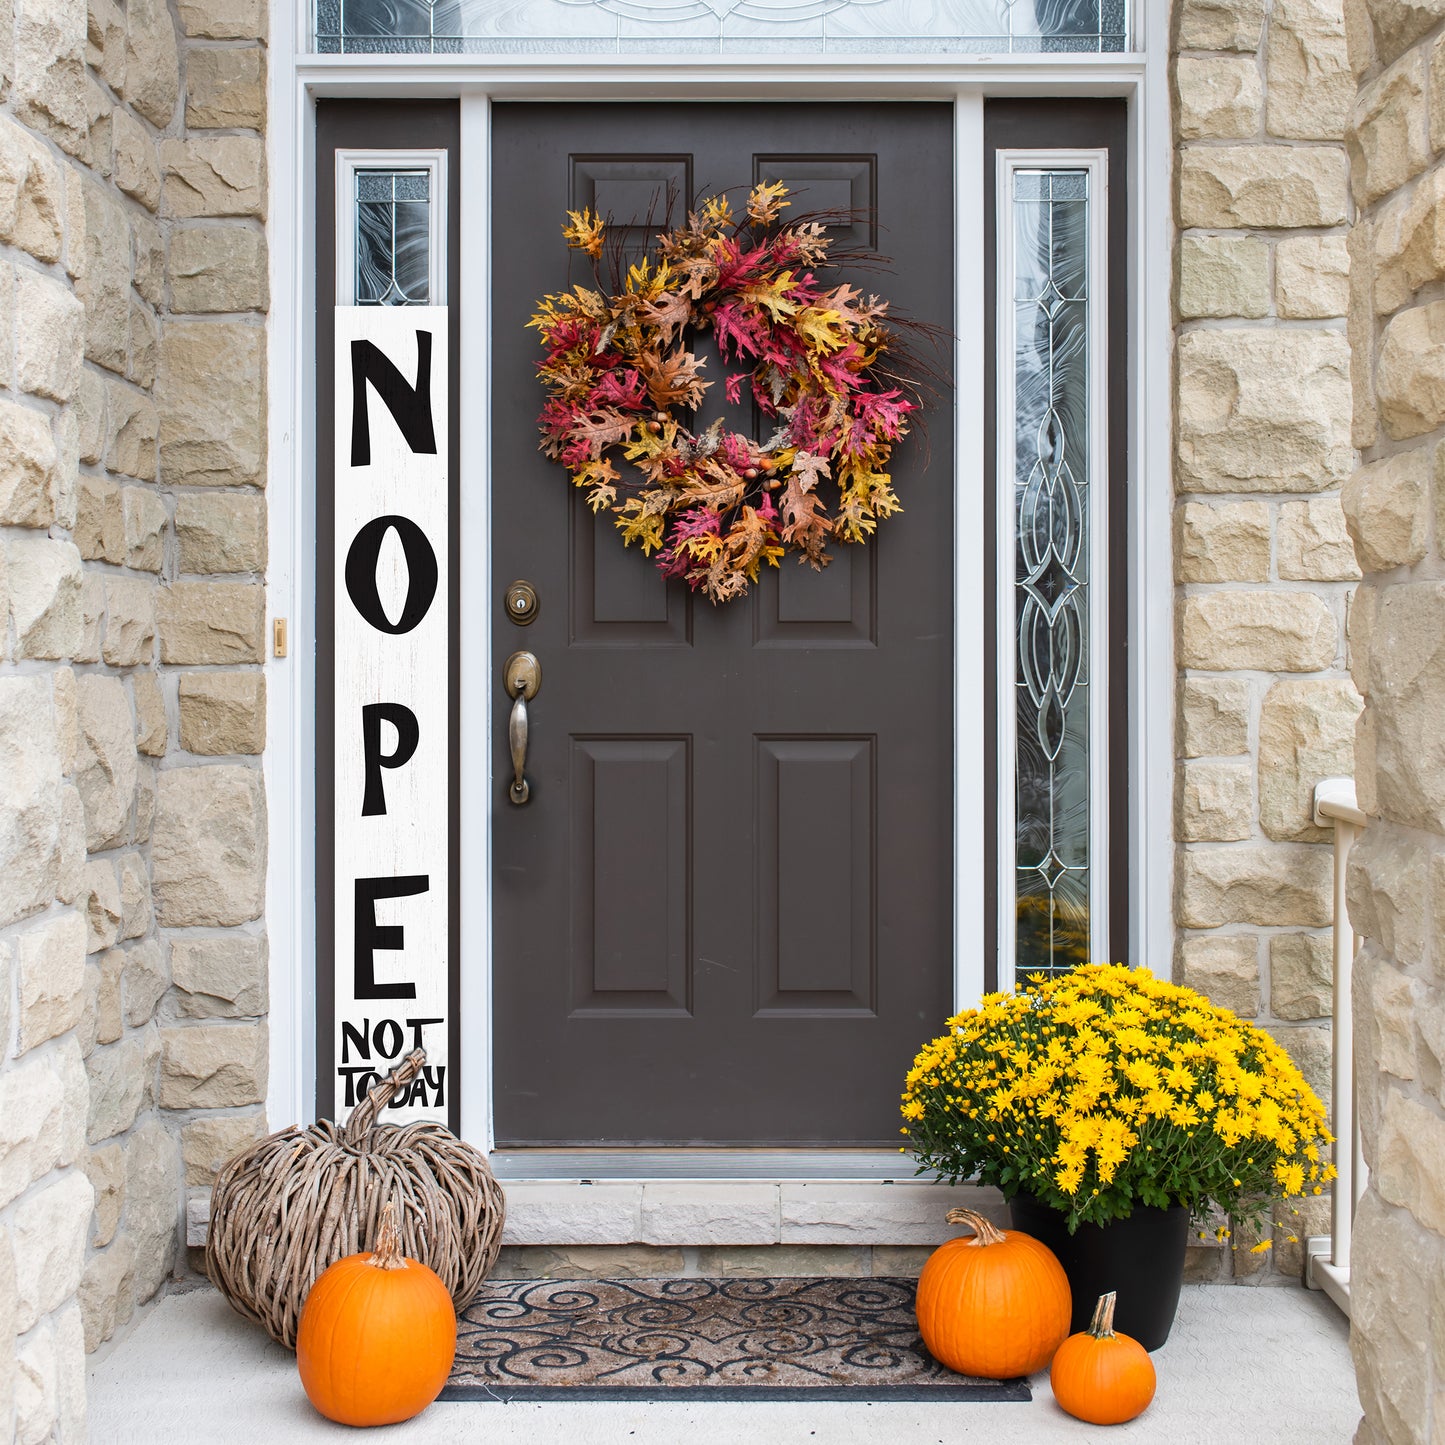 72-Inch Wooden "Nope, Not Today" Porch Sign for Front Door, White Standing Porch Sign with Foldable Design